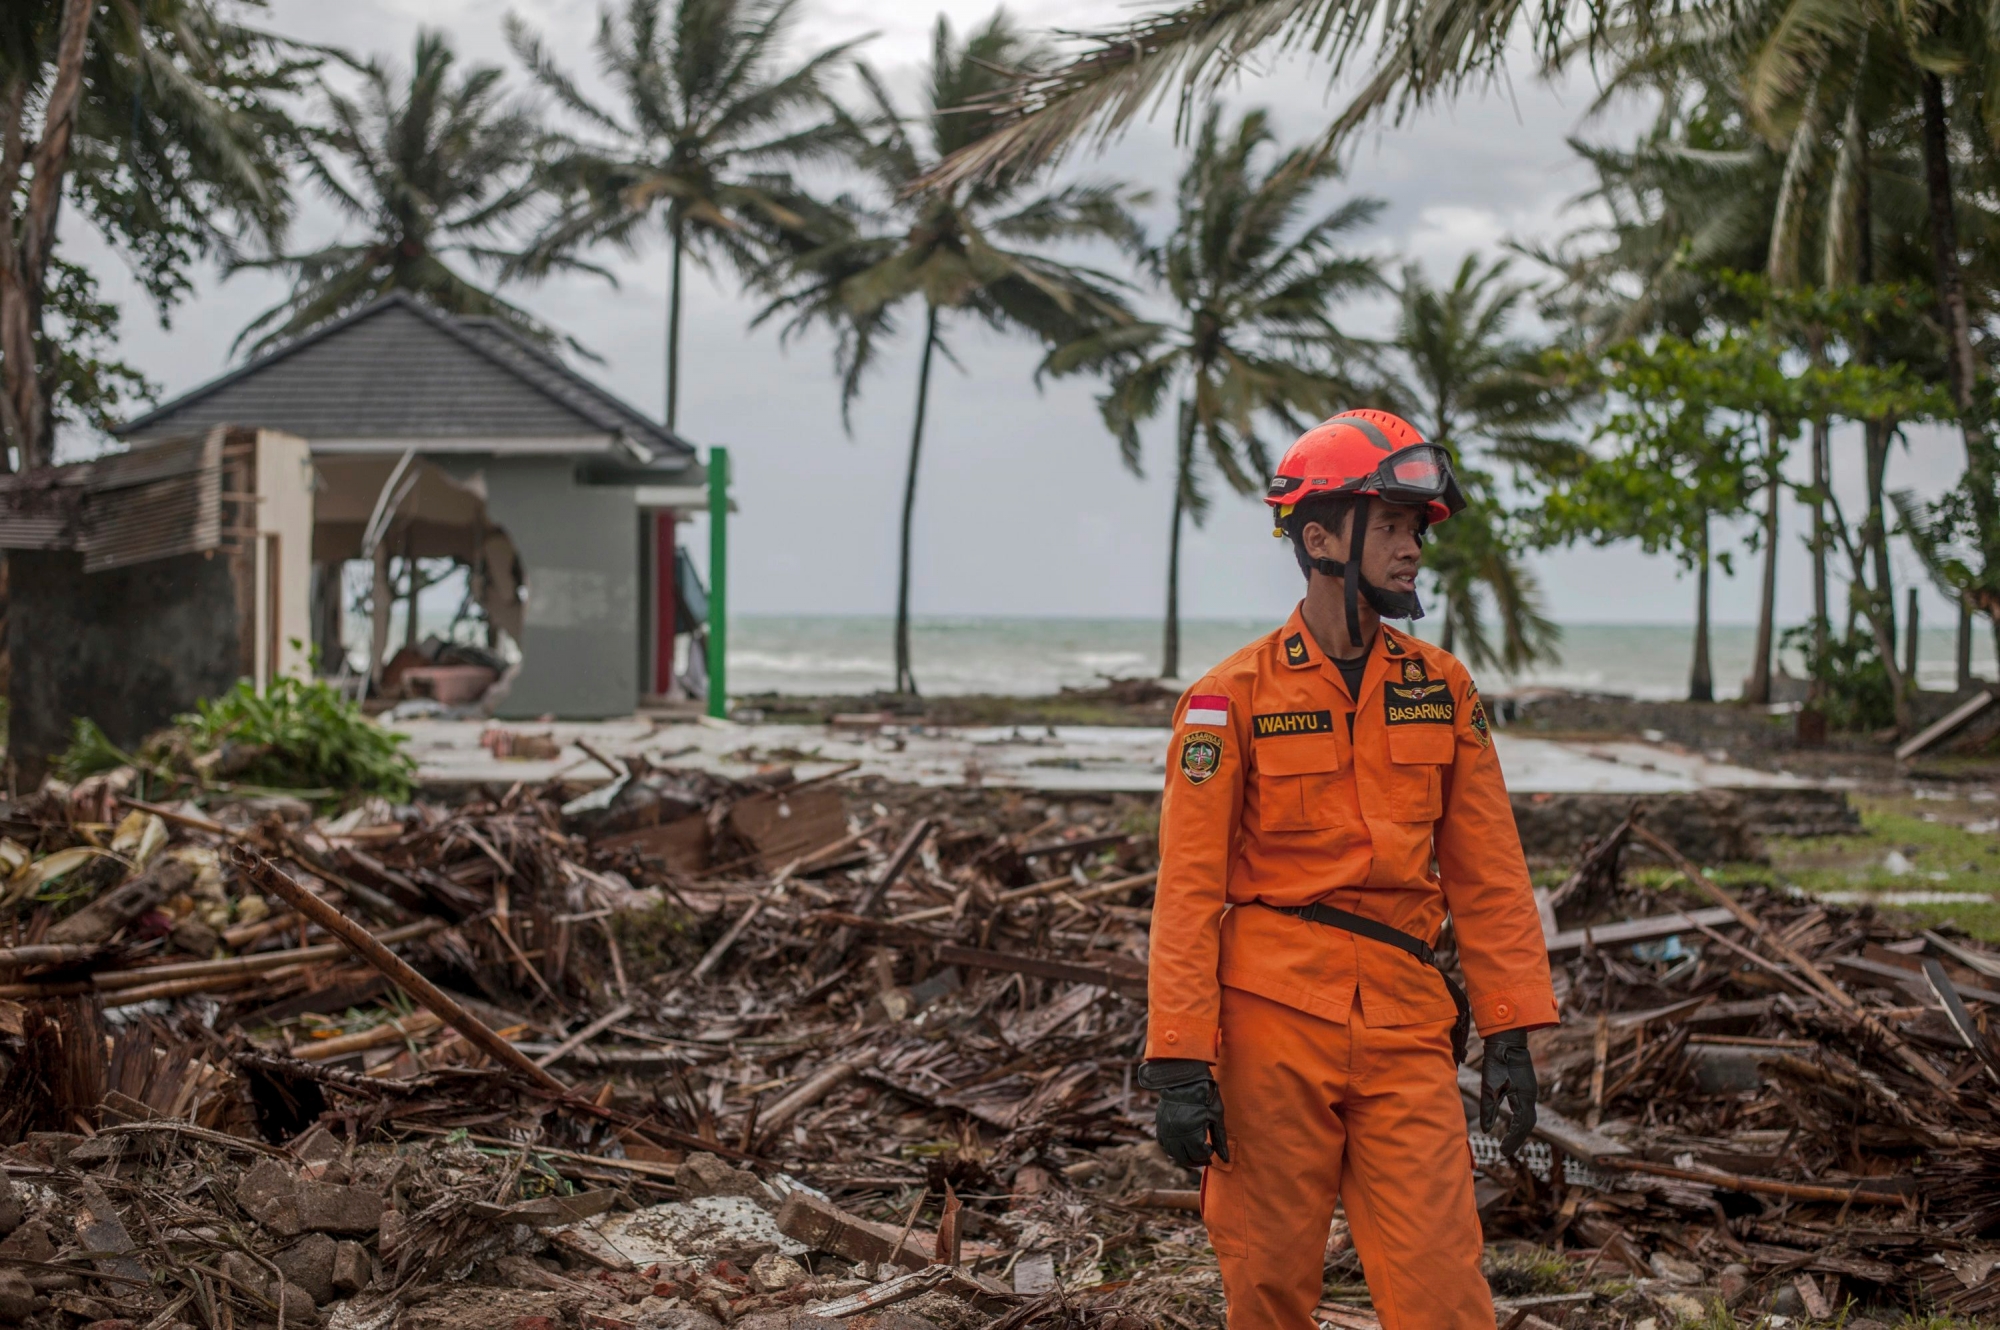 A rescuer stands amid debris at a tsunami-ravaged area in Carita, Indonesia, Sunday, Dec. 23, 2018. The tsunami occurred after the eruption of a volcano around Indonesia's Sunda Strait during a busy holiday weekend, sending water crashing ashore and sweeping away hotels, hundreds of houses and people attending a beach concert. (AP Photo/Fauzy Chaniago) Indonesia Tsunami